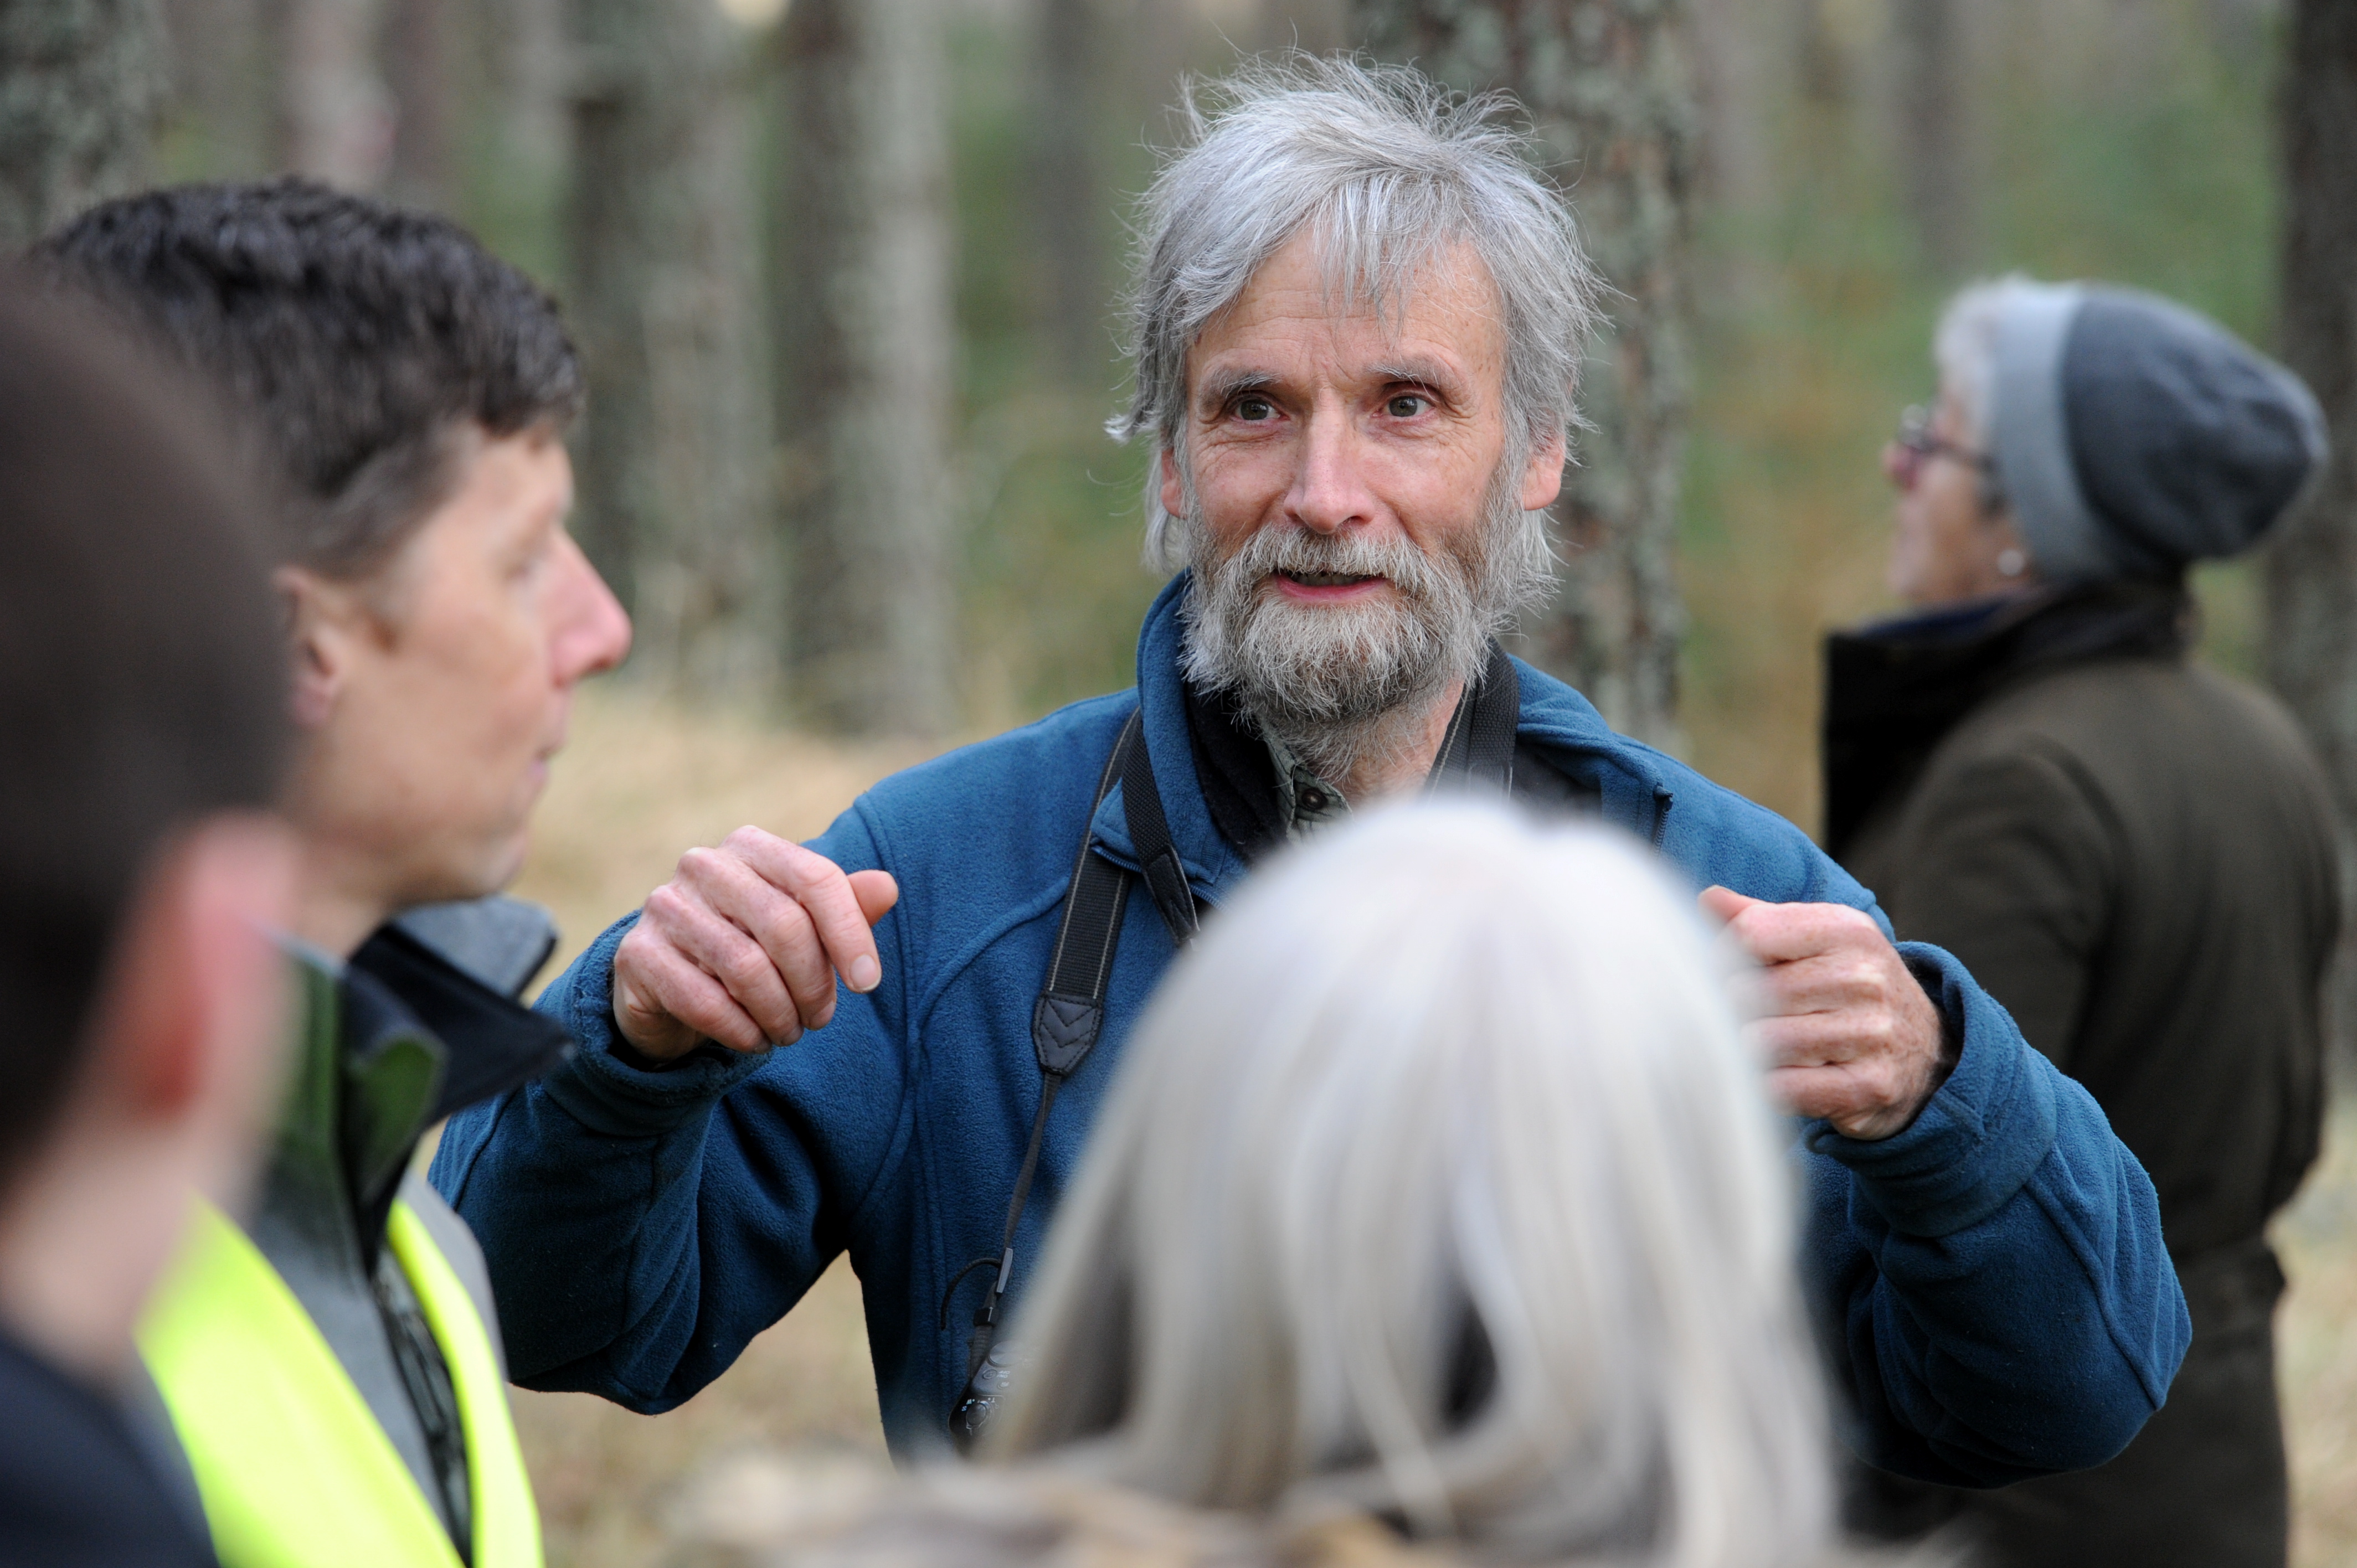 Picture by SANDY McCOOK    24th January '20
Cairngorms National Park planning committee site sisit for seven propsed houses in Lettoch Wood, Nethy Bridge. Objector Gus Jones speaks during the visit.